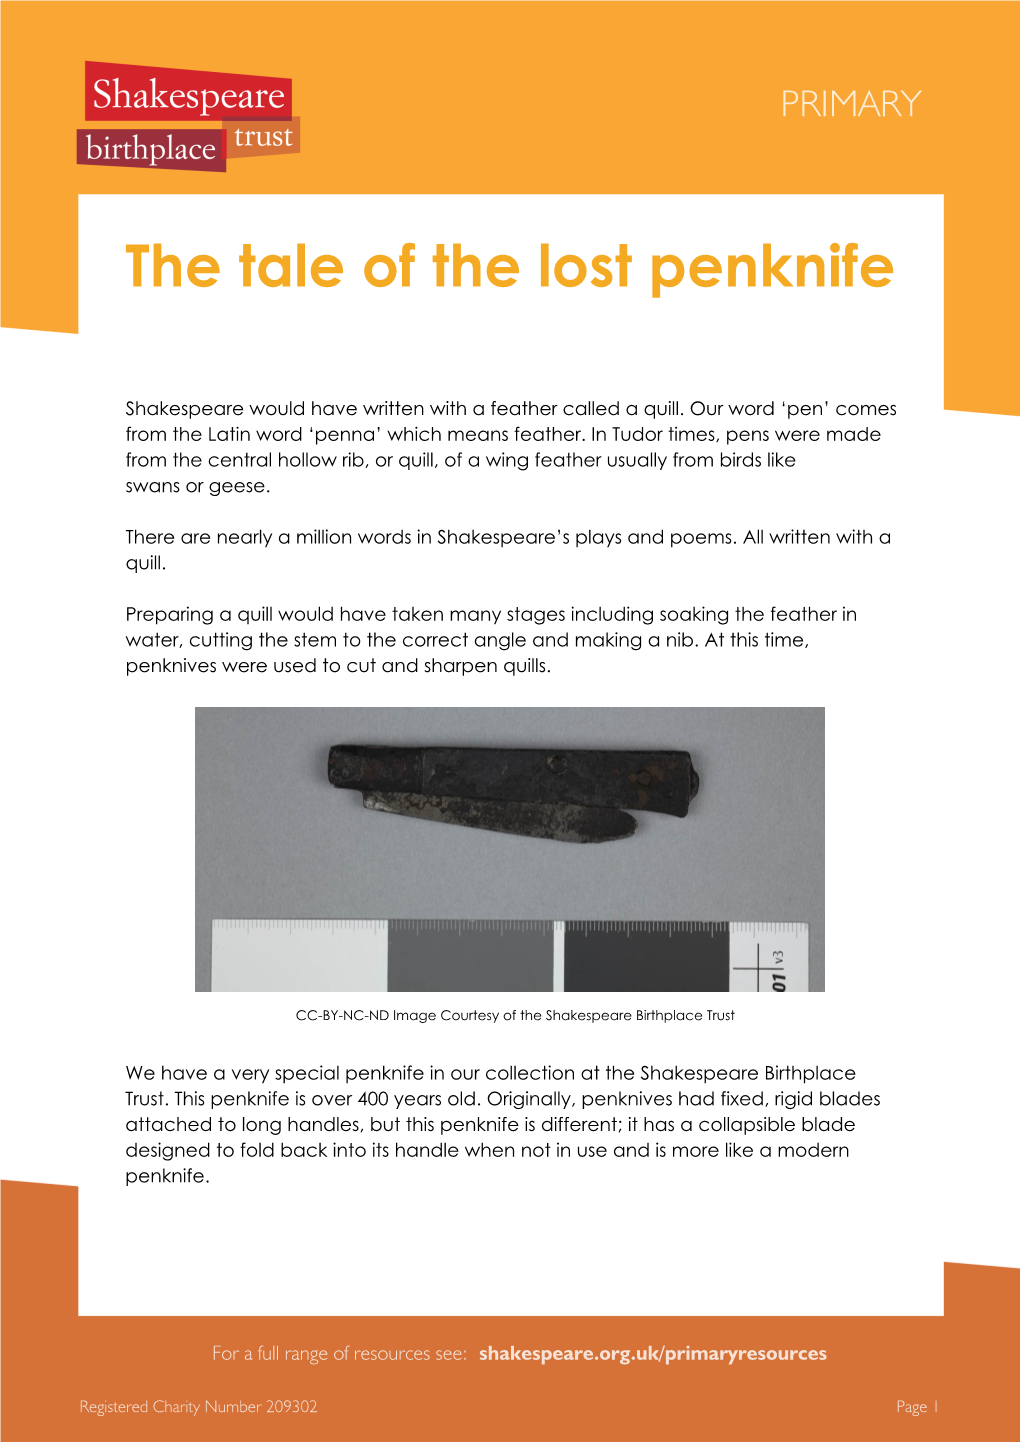 The Tale of the Lost Penknife